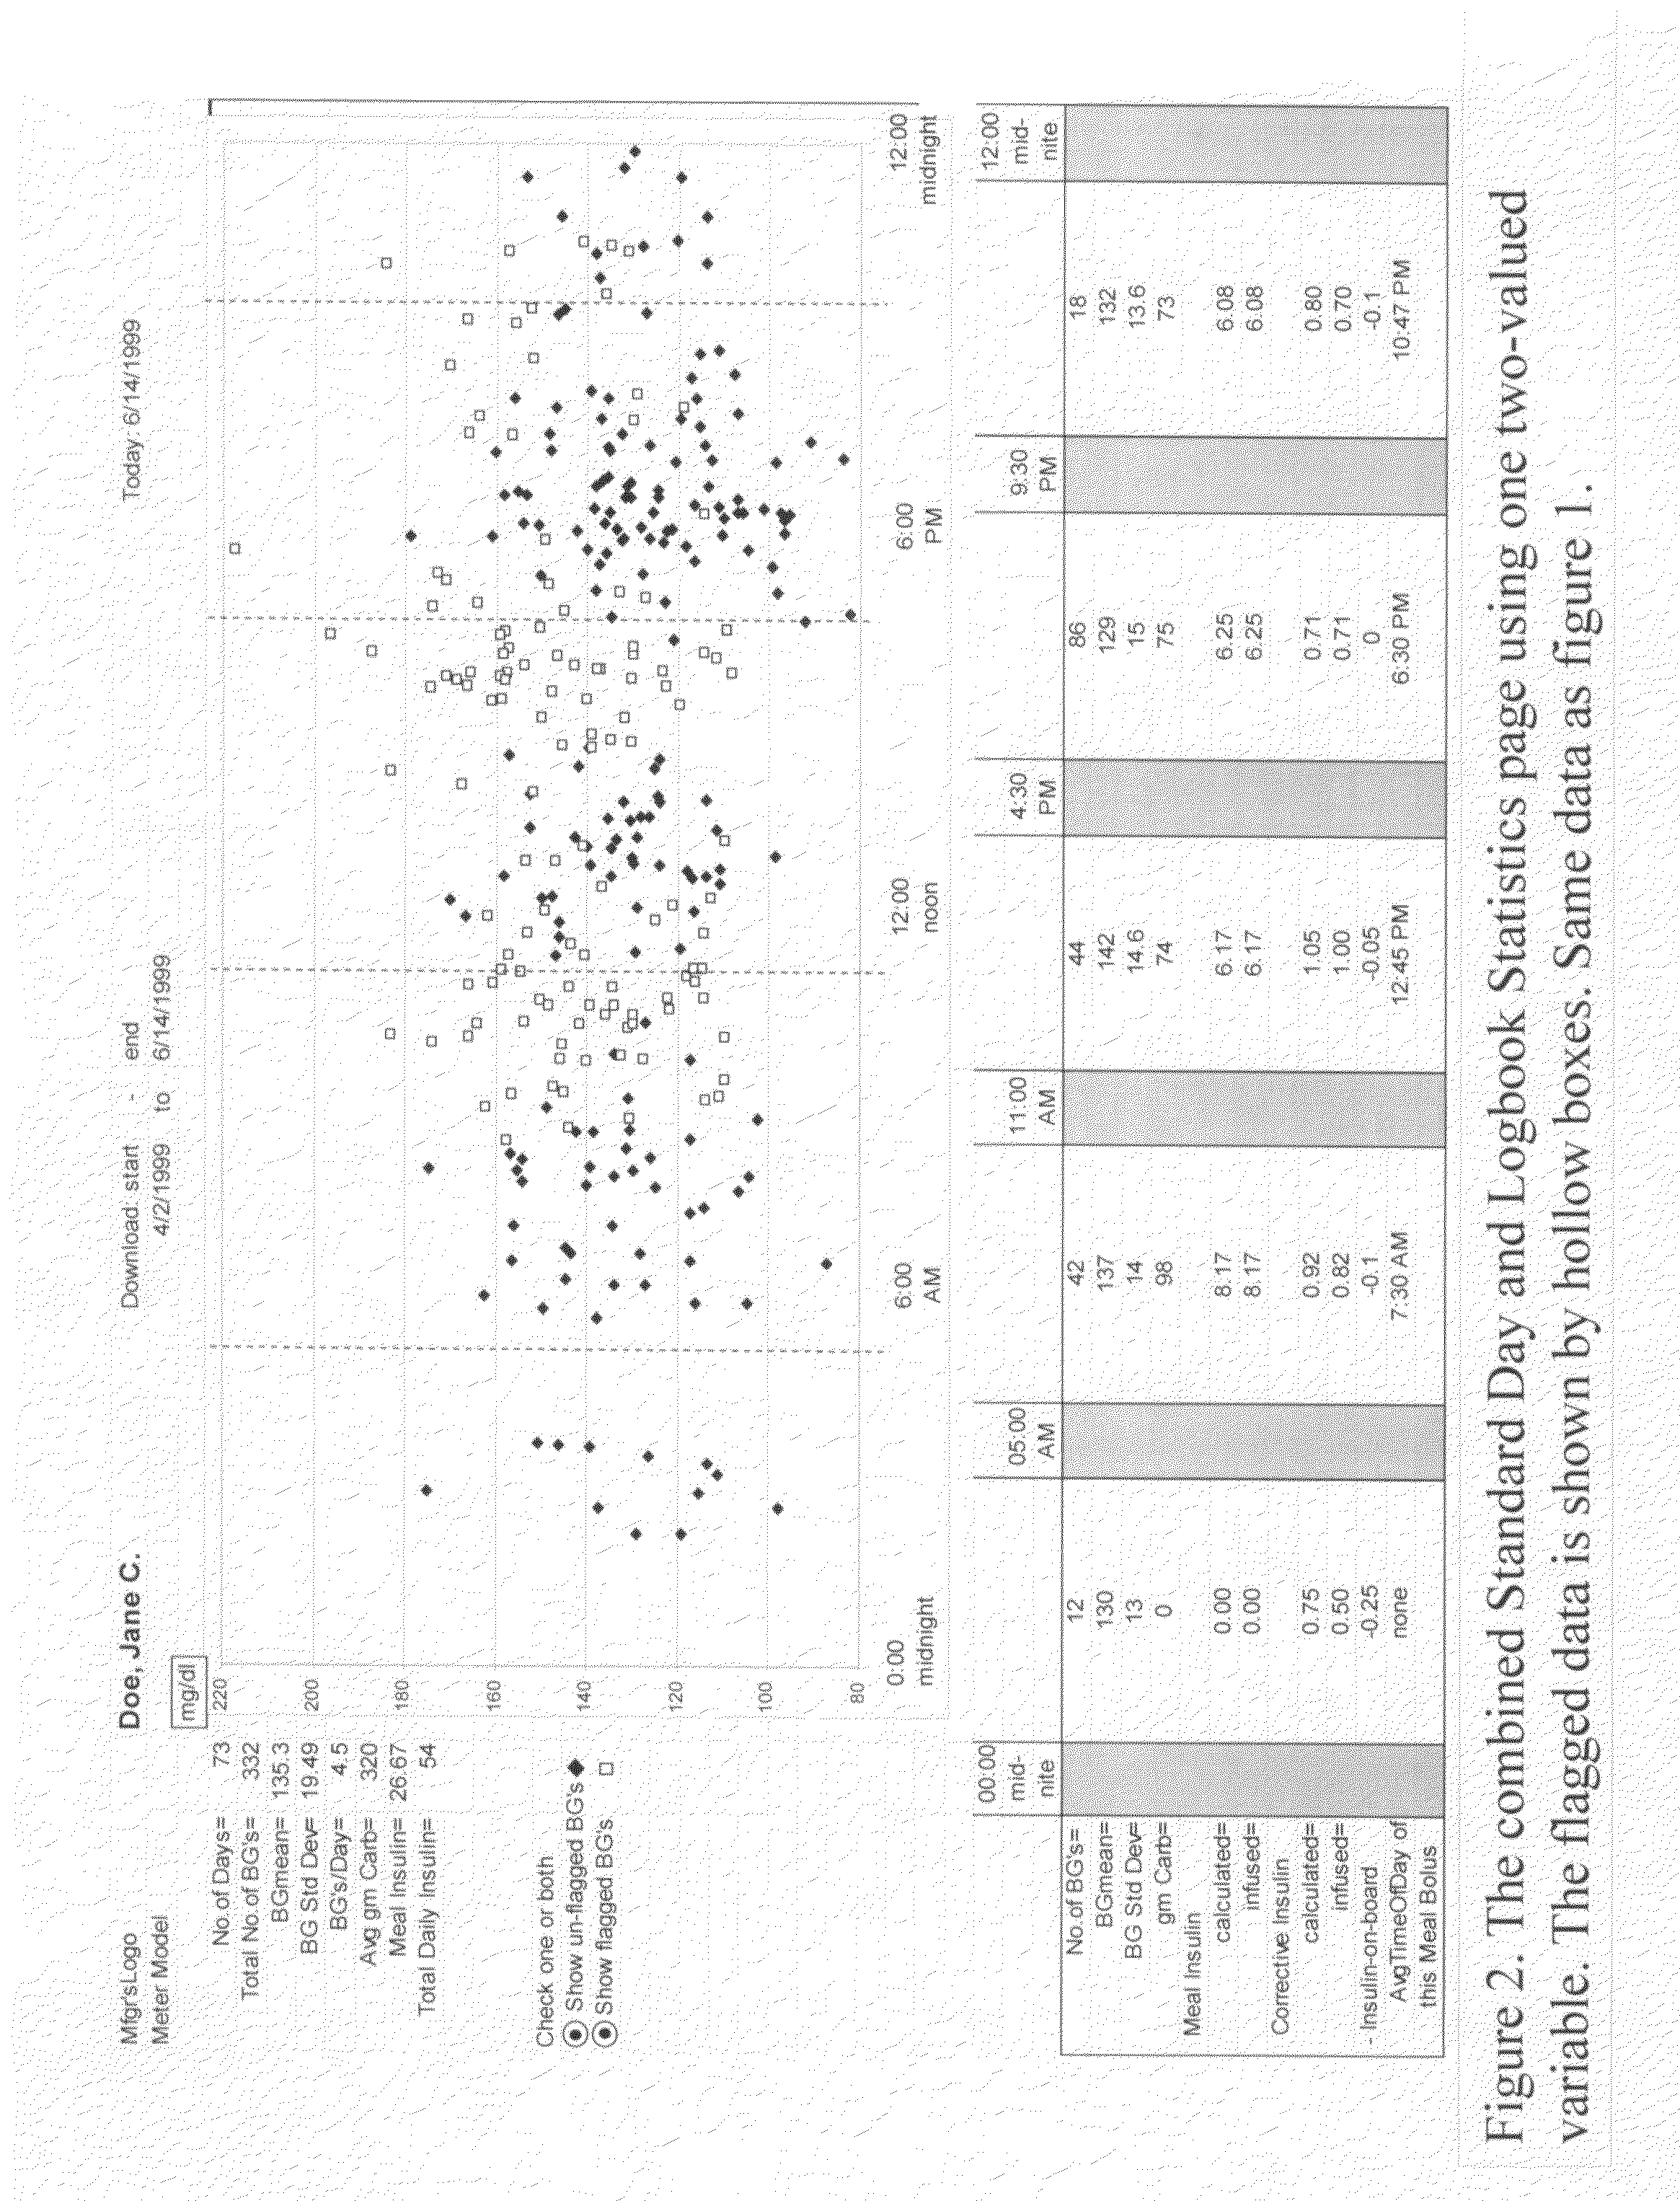 Method and system for categorizing blood glucose tests at test time in a portable device or later in a downloading program and then analyzing the categories separately